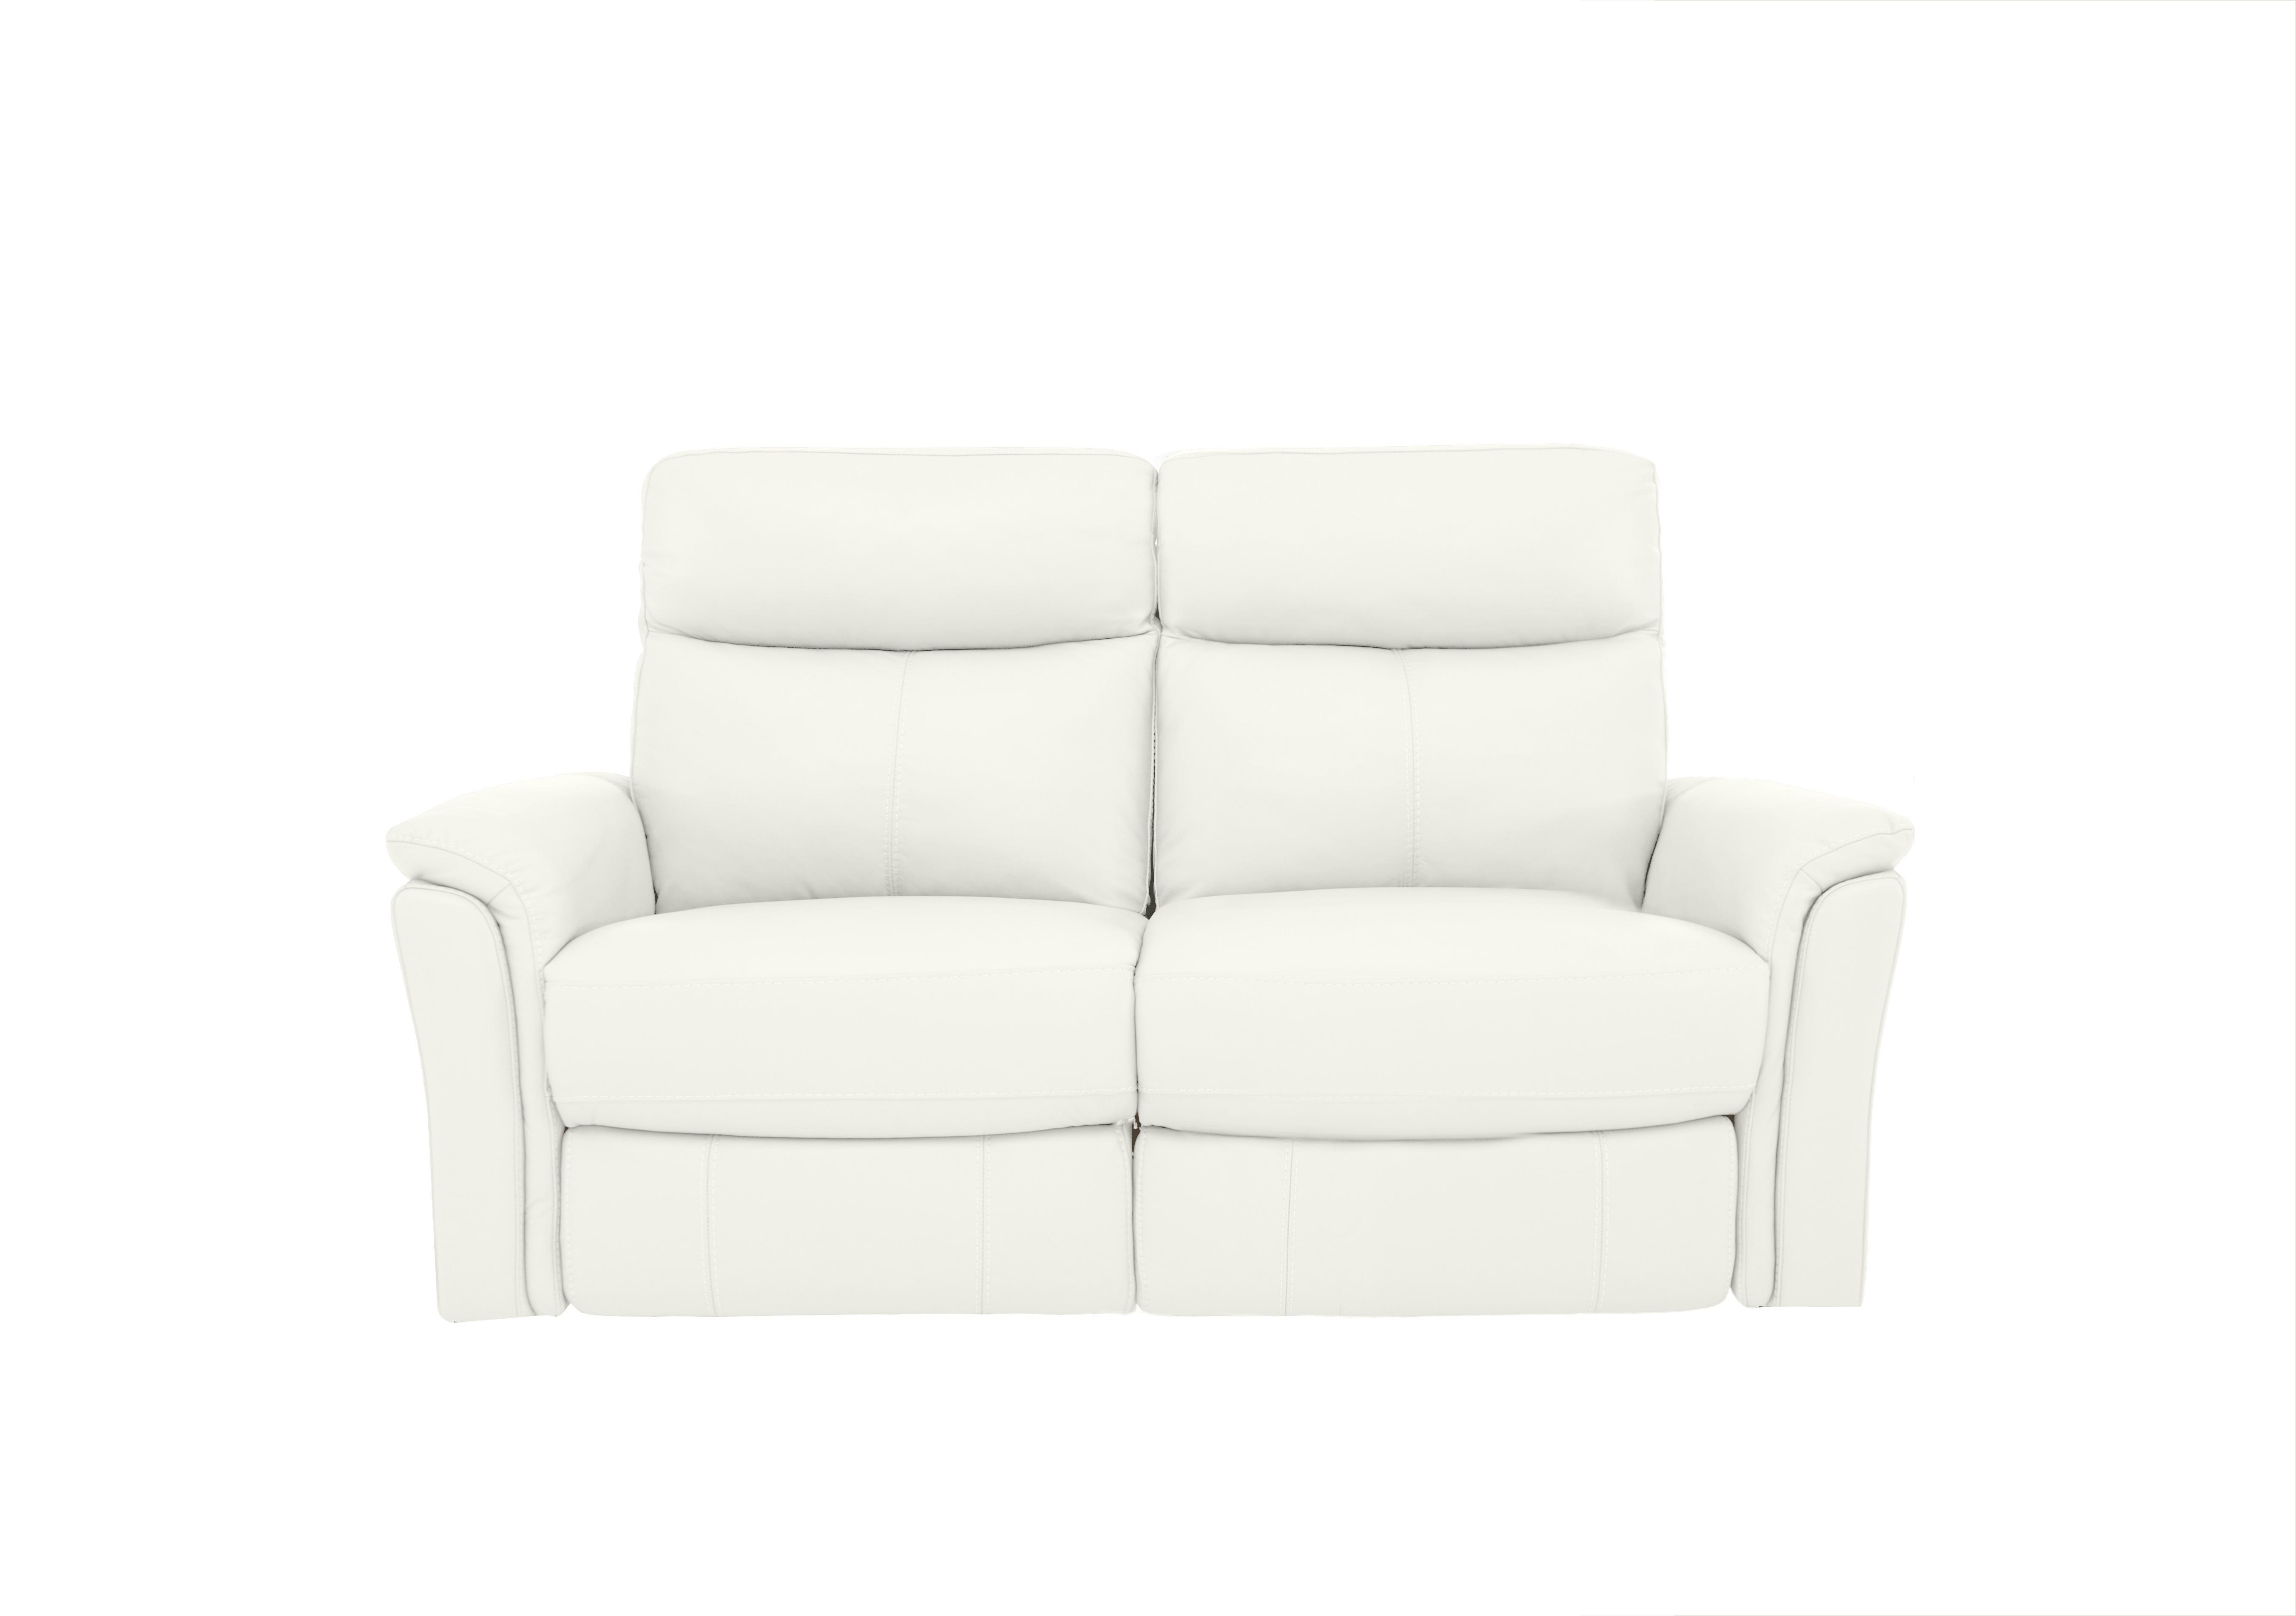 Compact Collection Piccolo 2 Seater Sofa in Bv-744d Star White on Furniture Village